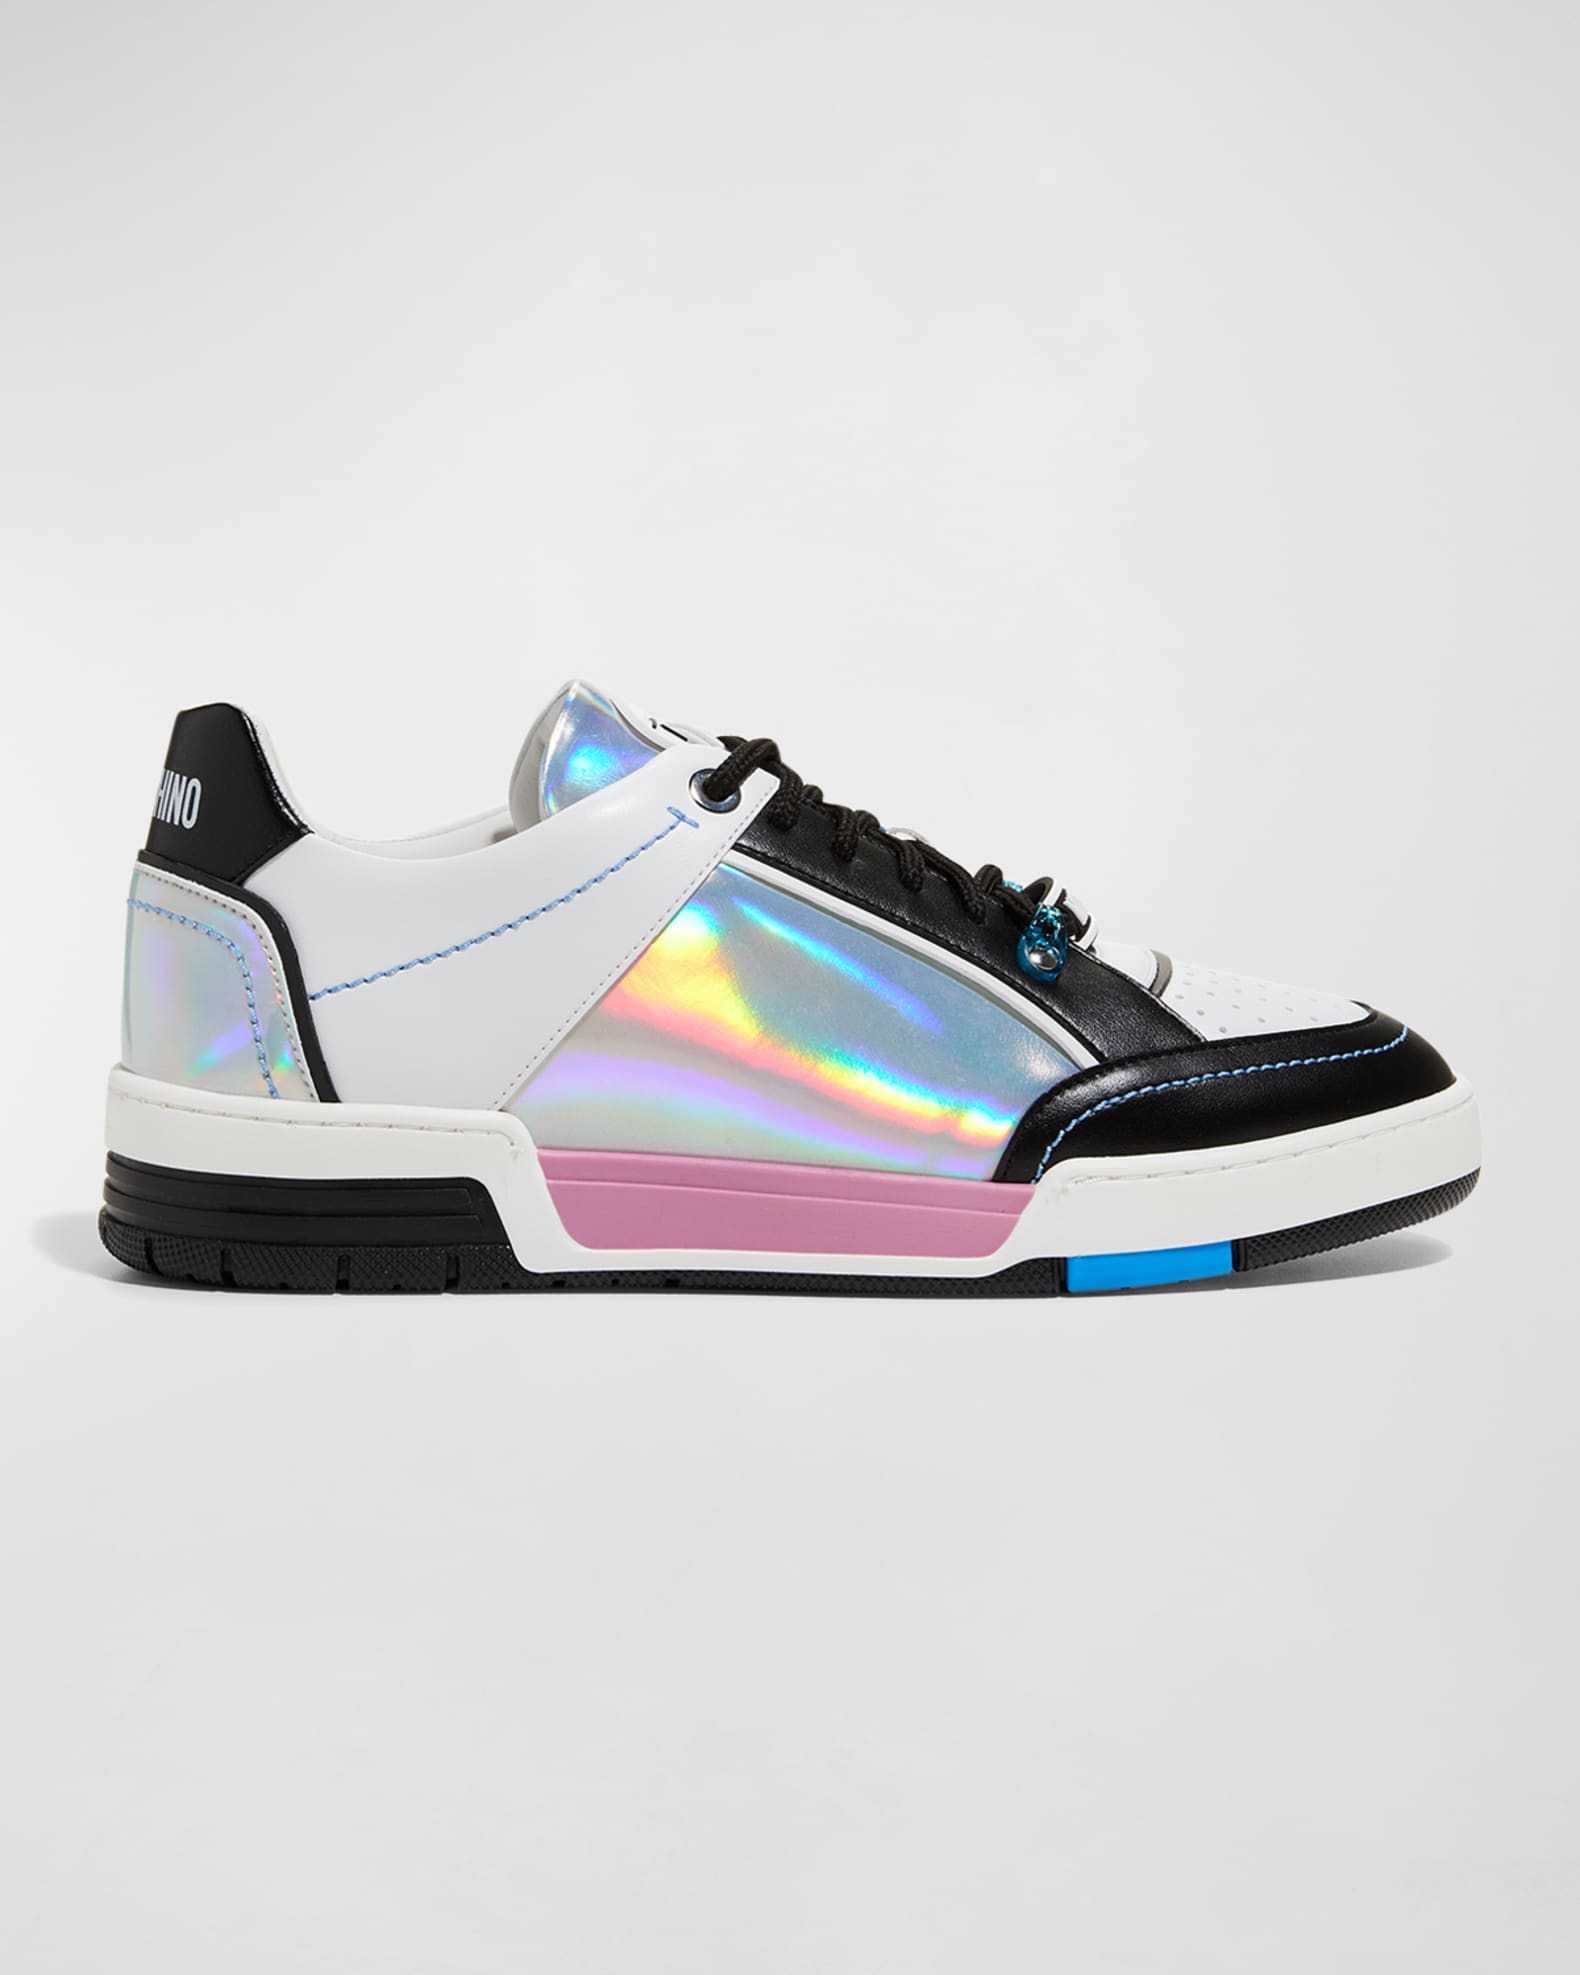 Louis Vuitton Leather Colorblock Pattern Sneakers UK 10 | 11